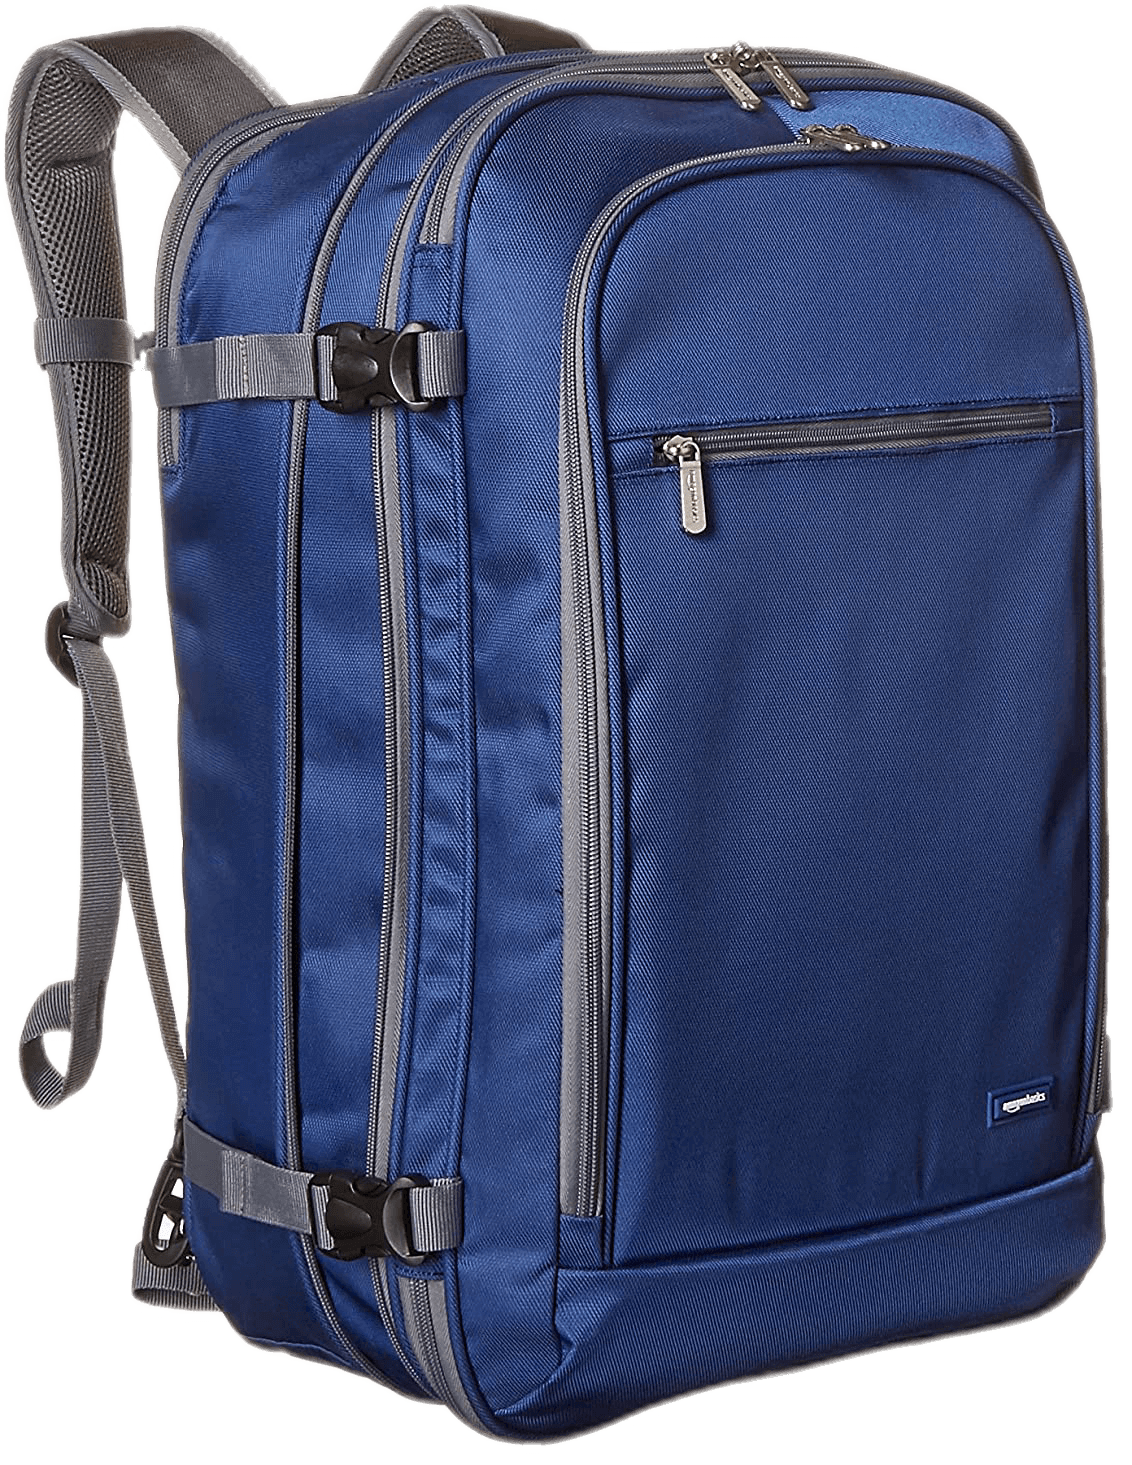 Amazon Basics Carry-On Travel best carry-on backpack